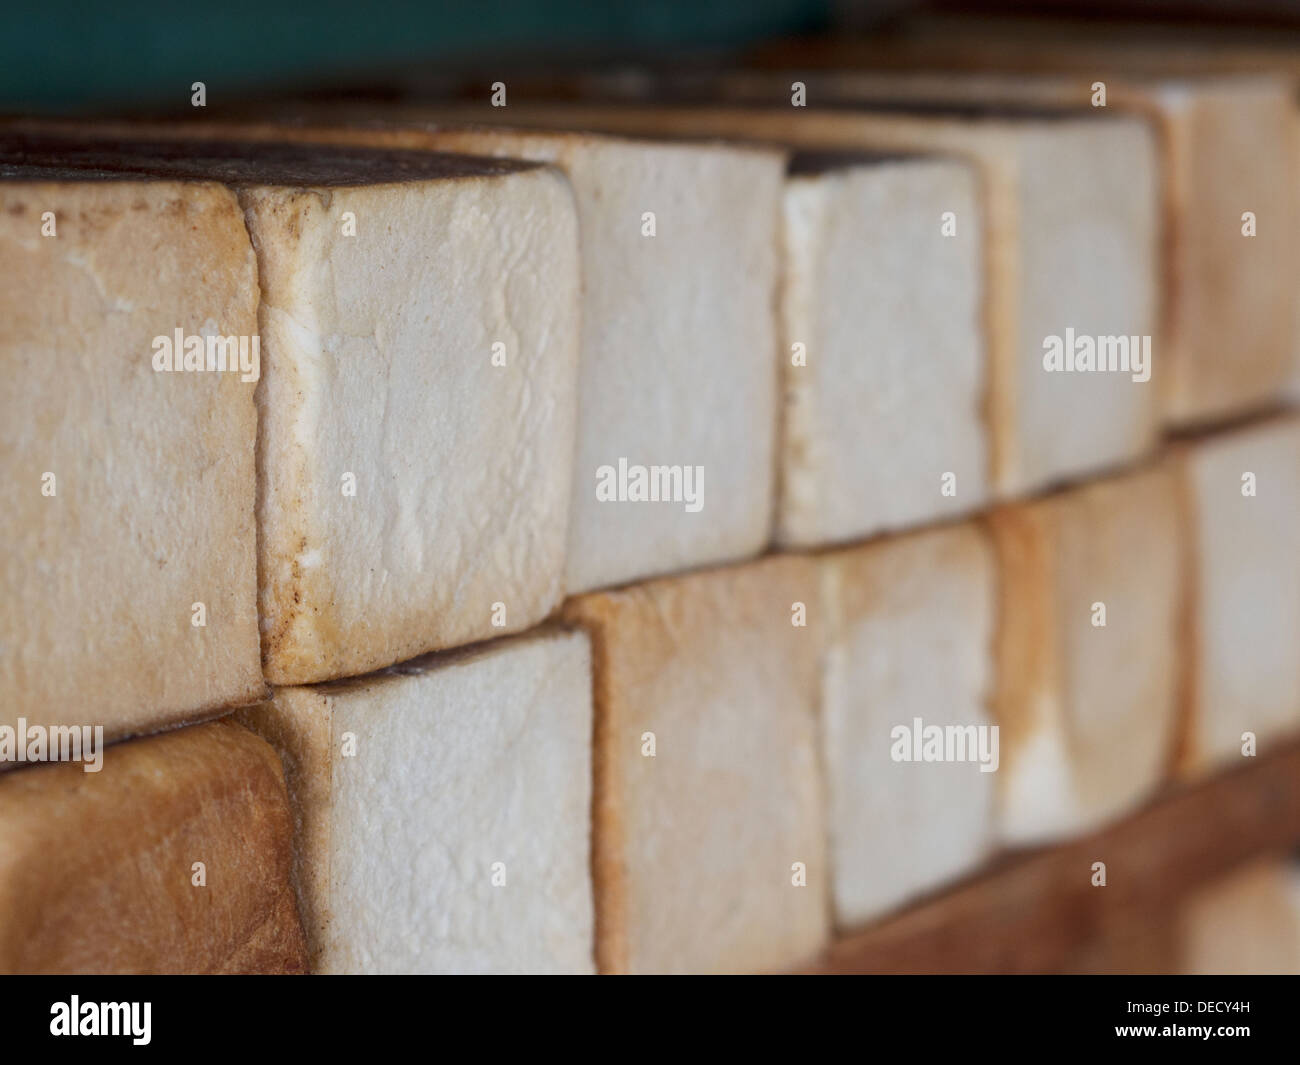 Rustic, unsliced loaves of bread on a bakery shelf. Stock Photo